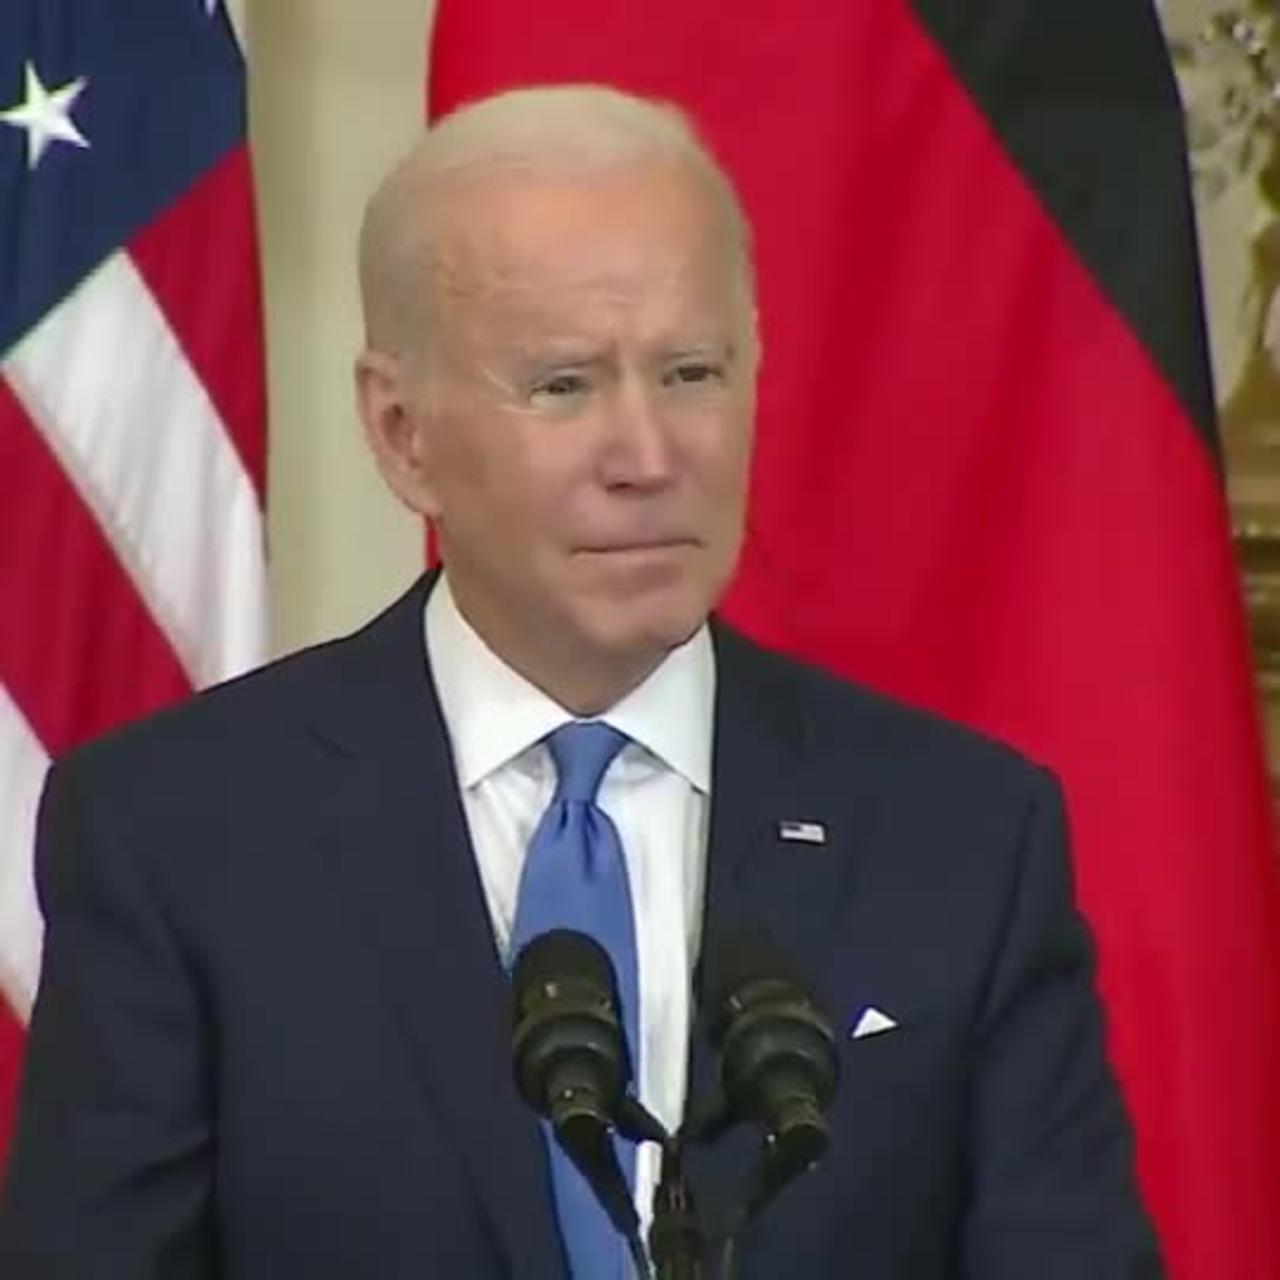 Joe Biden said that Nord Stream would be done for if Russia invades Ukraine 👀